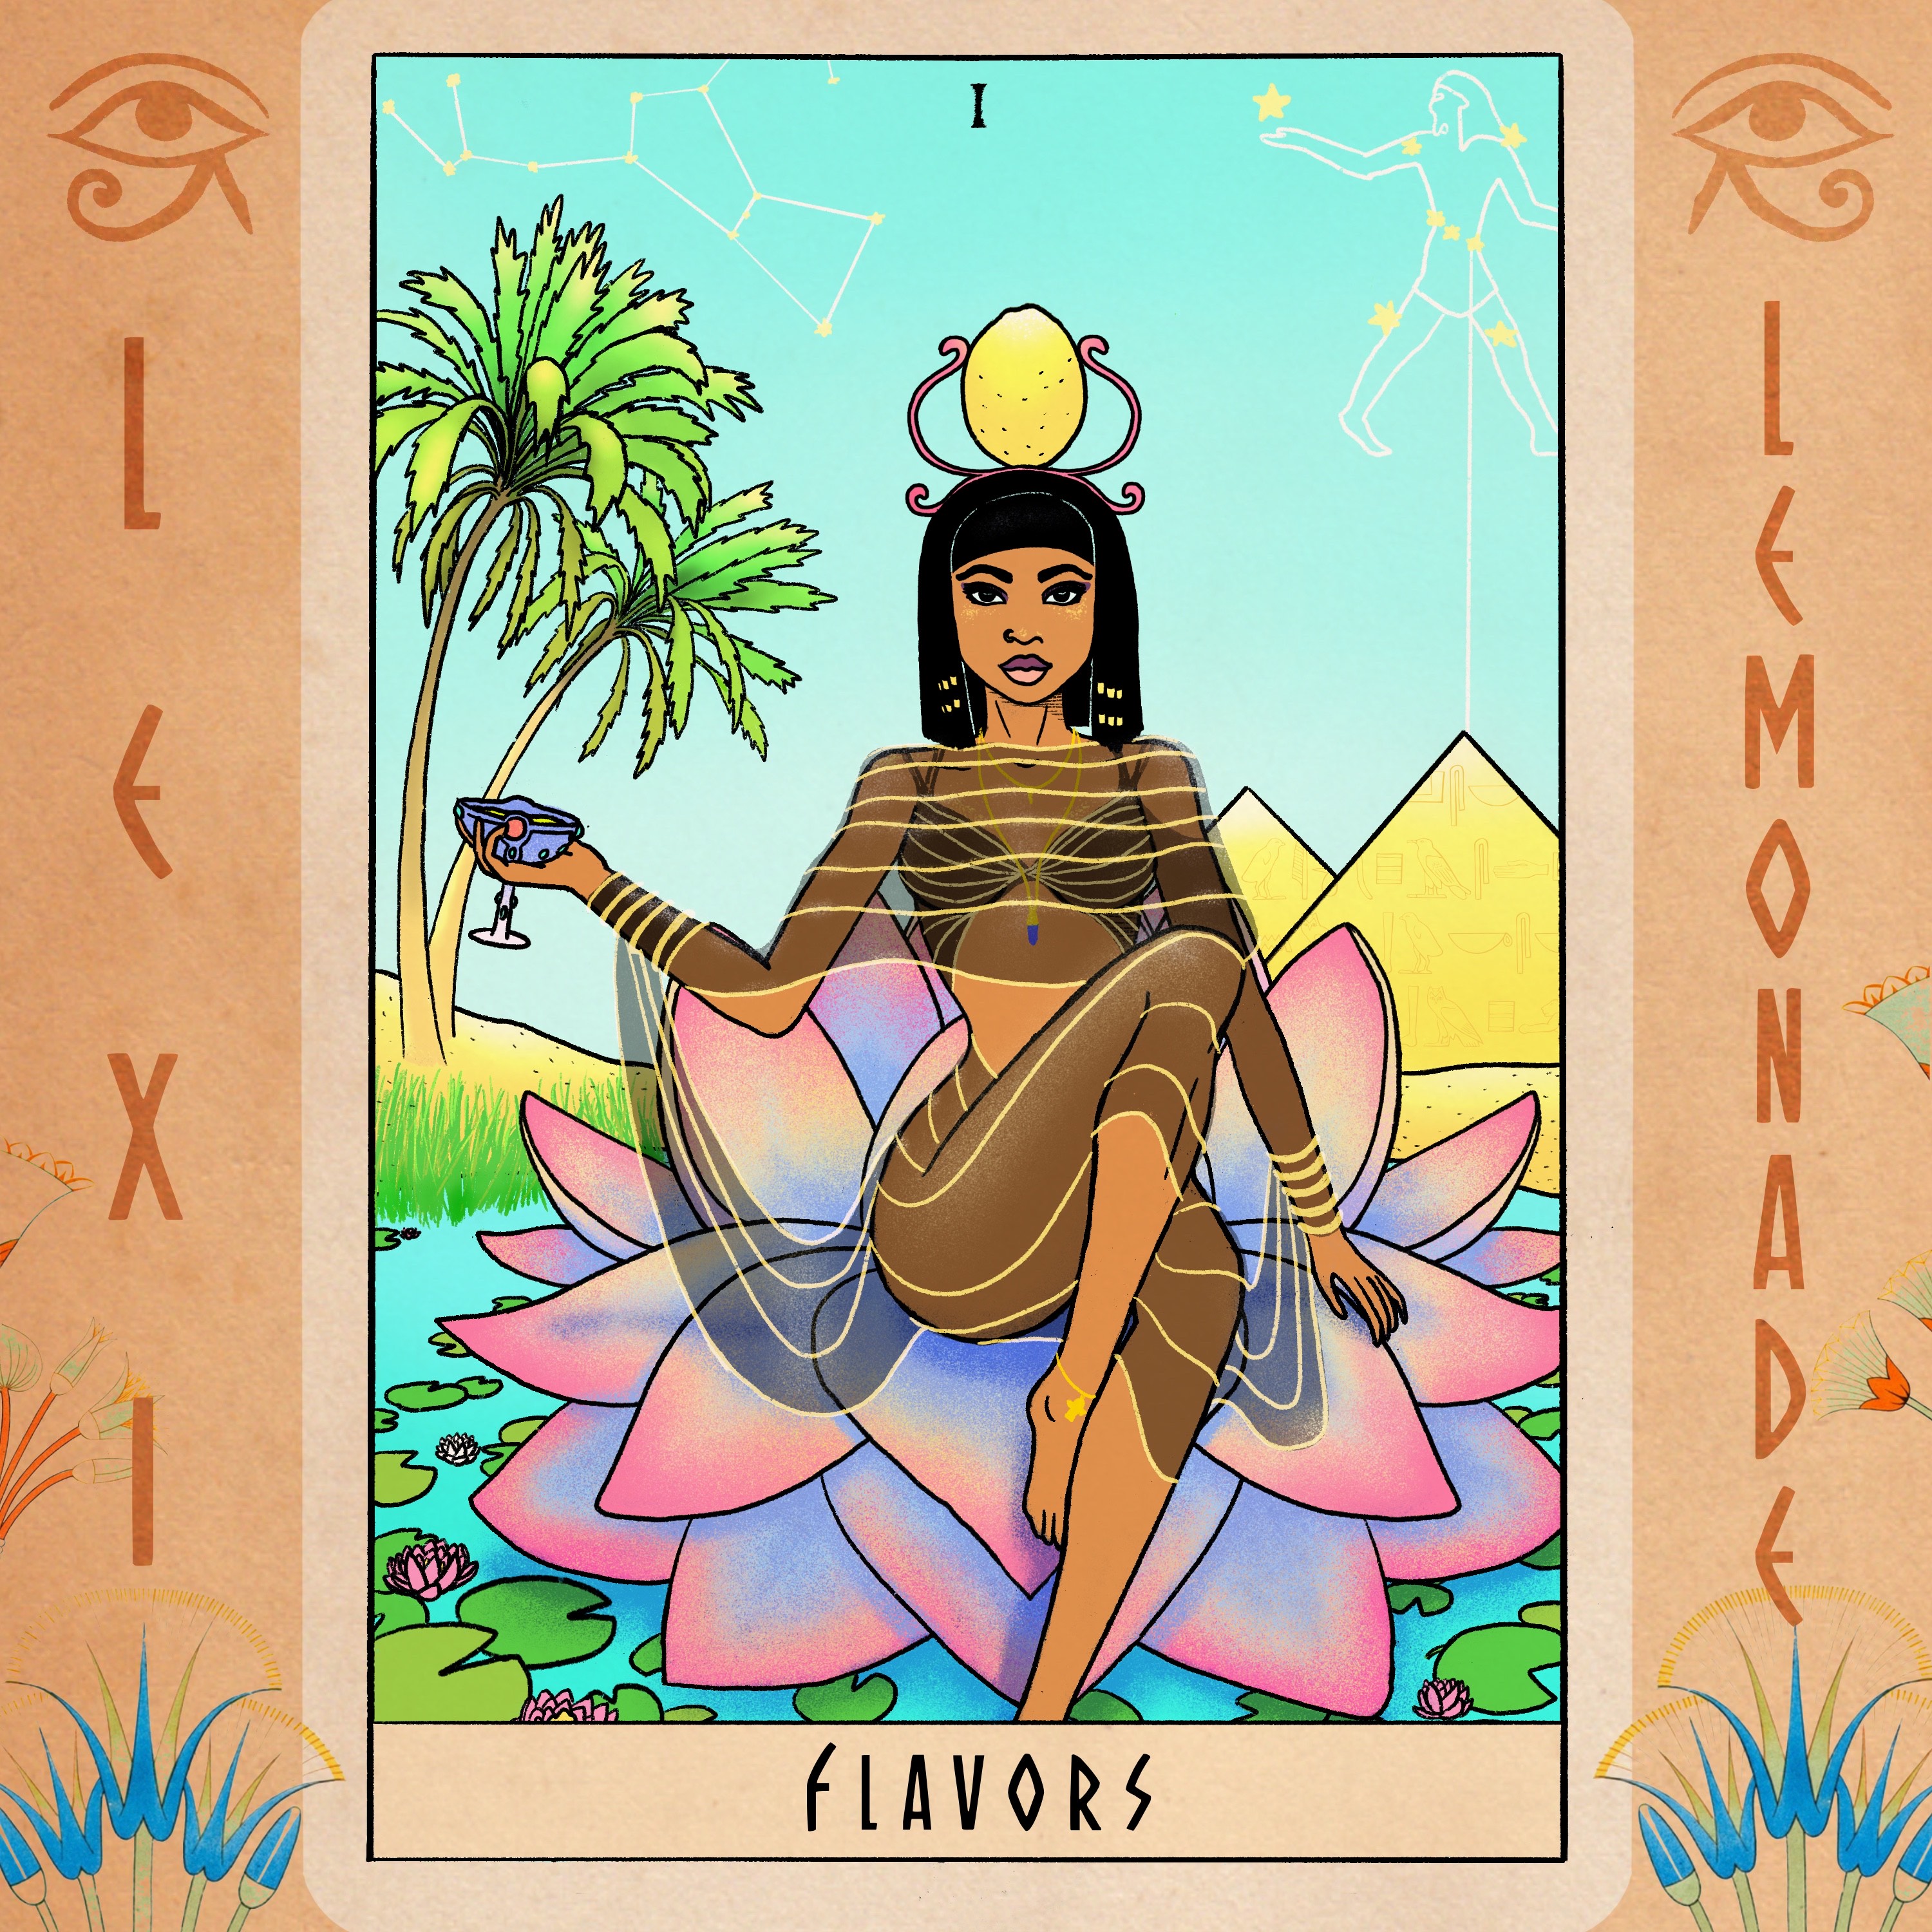 Lexi Lemonade’s experimental and bold debut EP “Flavors”